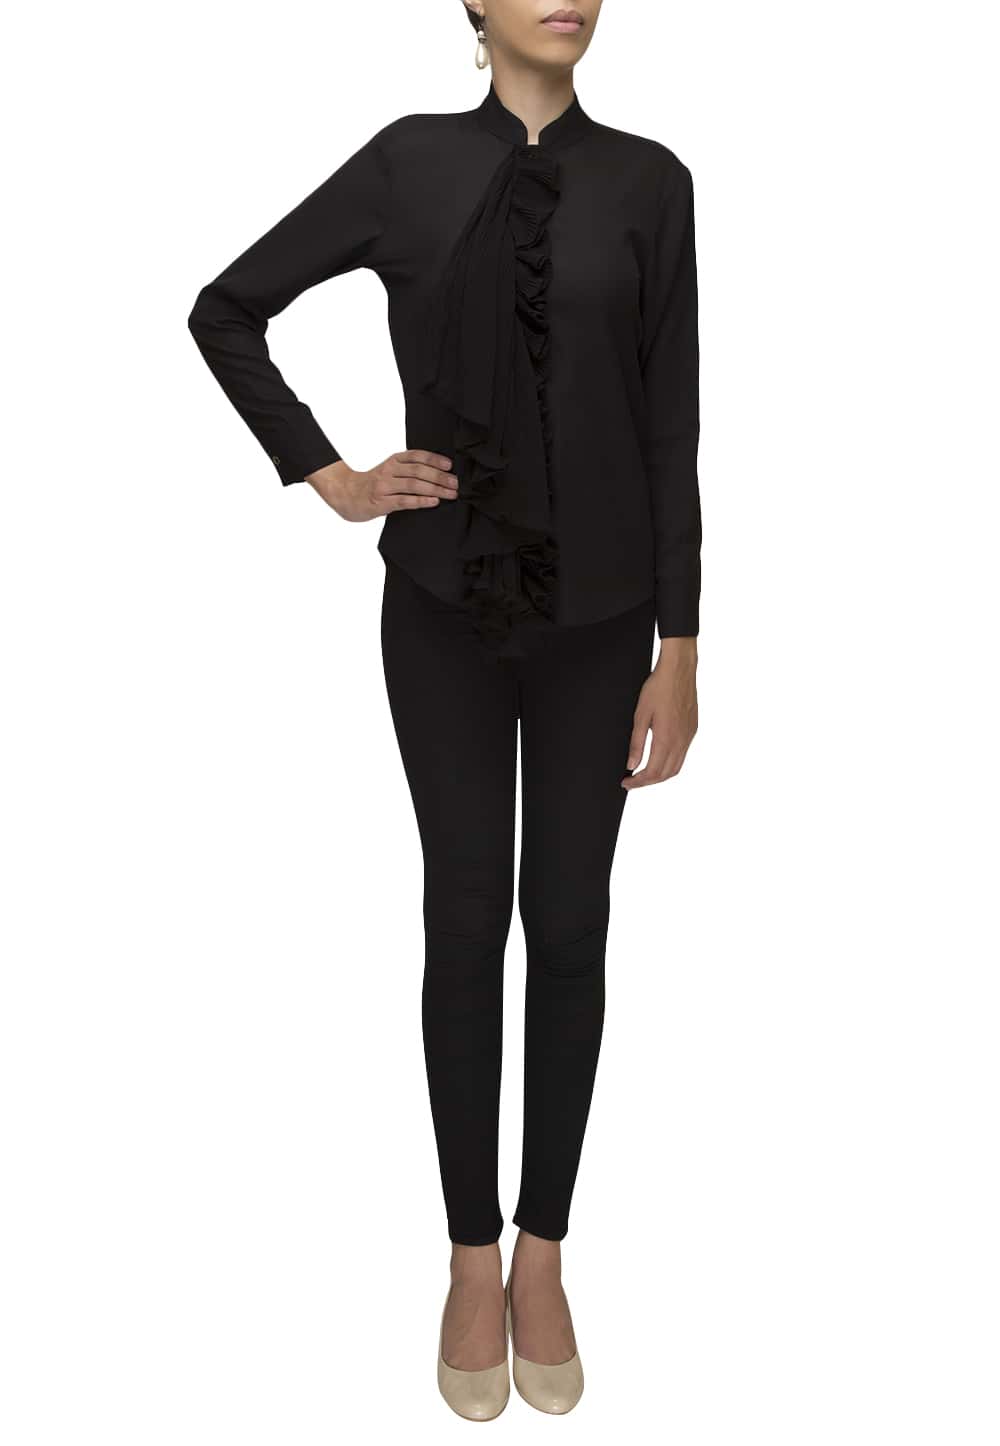 Black pleated placket shirt available only at IBFW